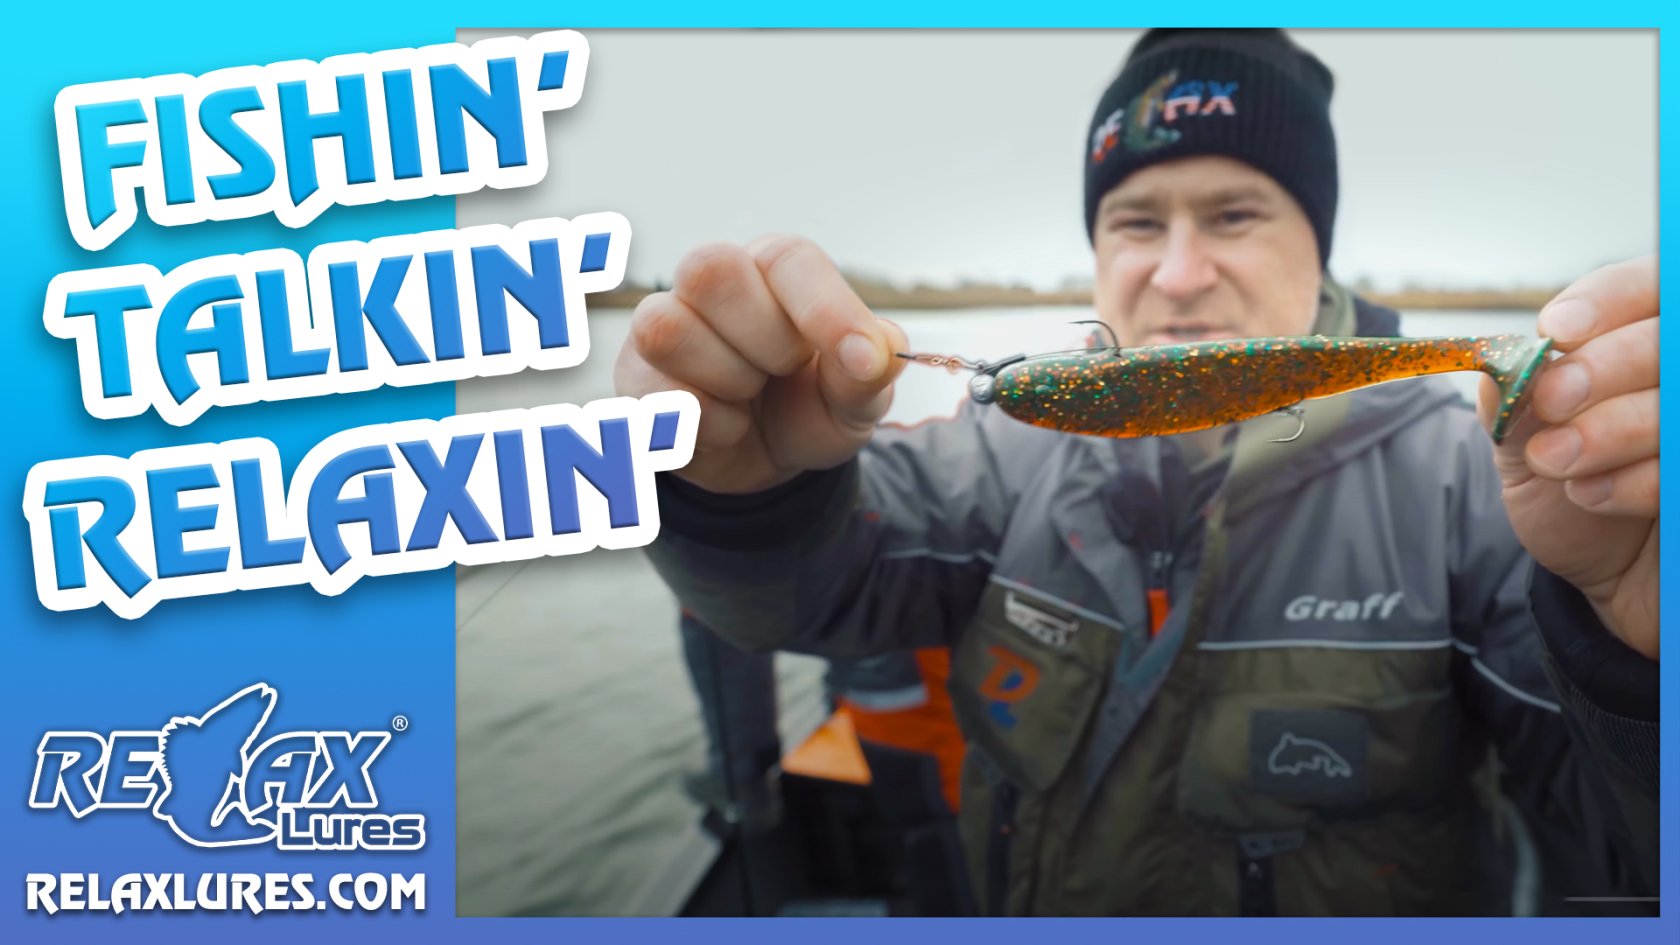 RUGEN - LET'S TALK ABOUT FISHING - RELAX LURES